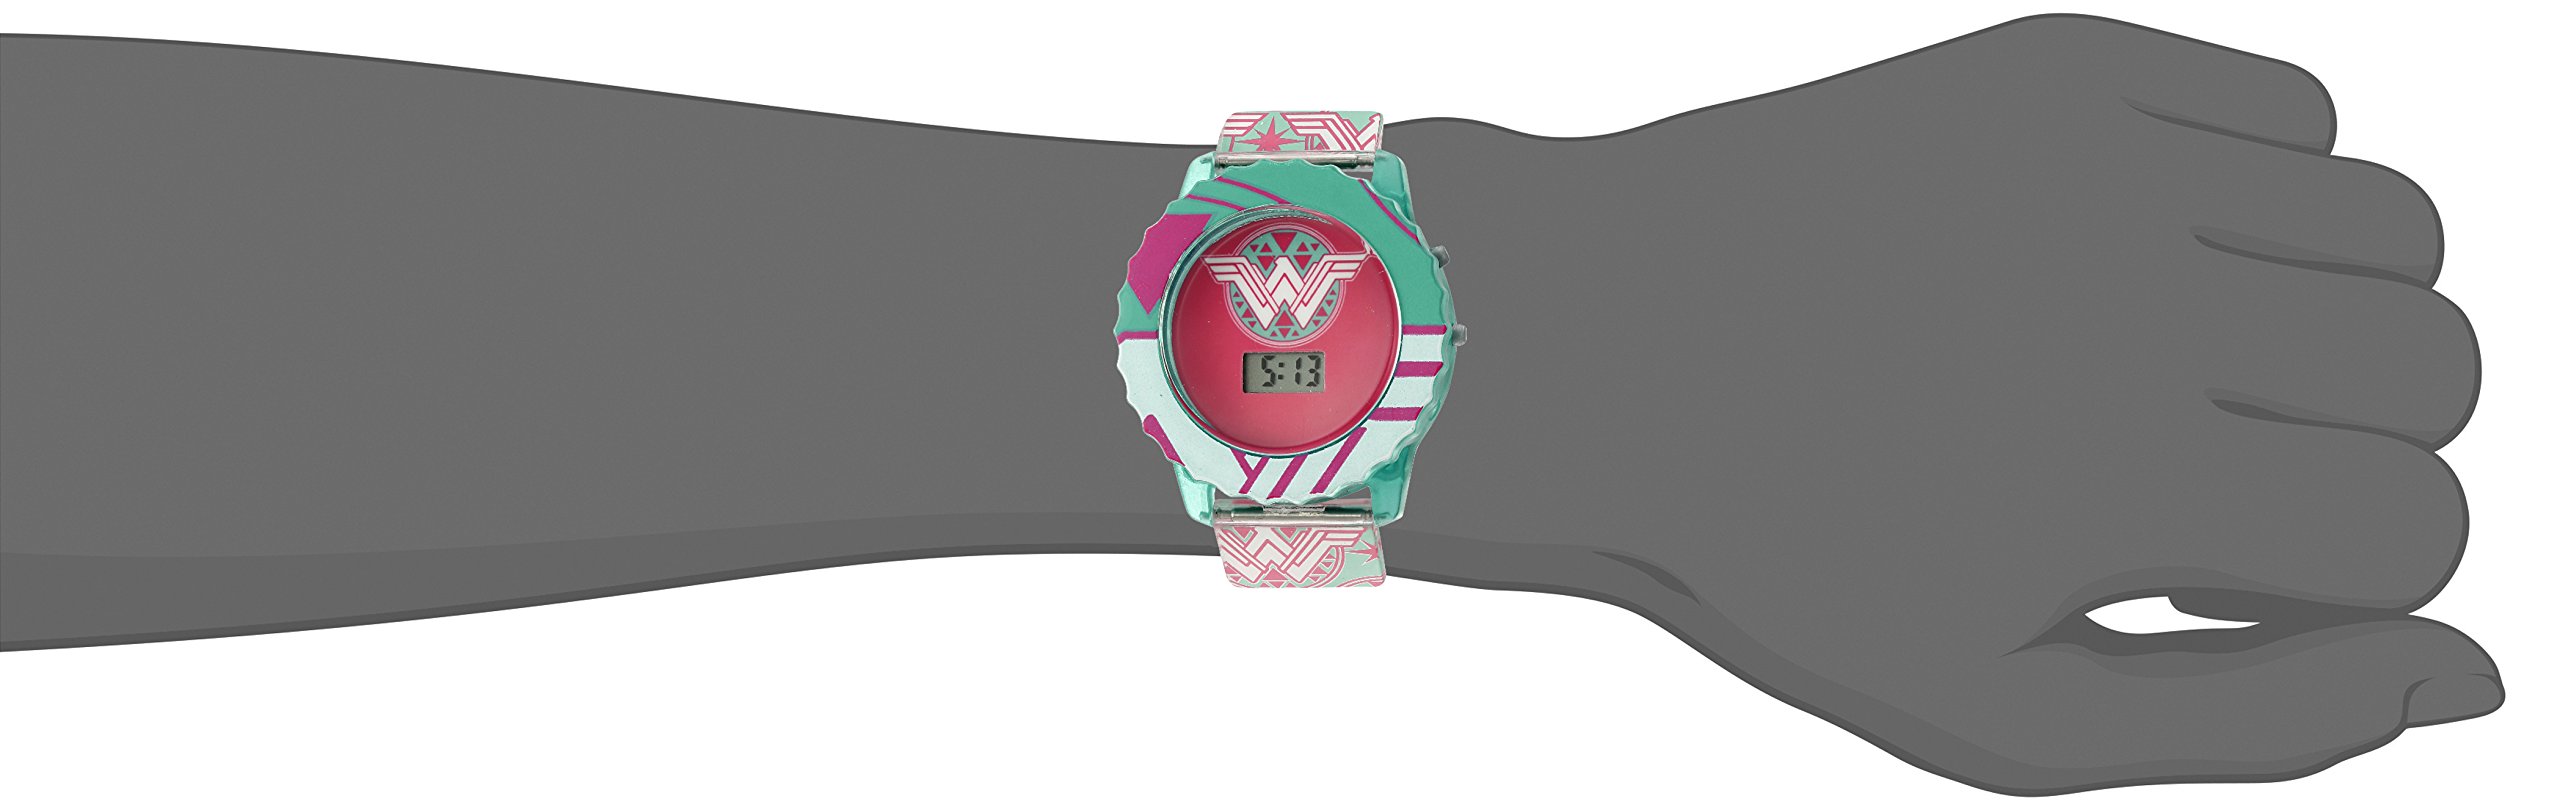 Accutime DC Comics Wonder Woman Girl's Digital Casual Watch with Flashing LED Lights, Color: Teal (Model: WOM4014)